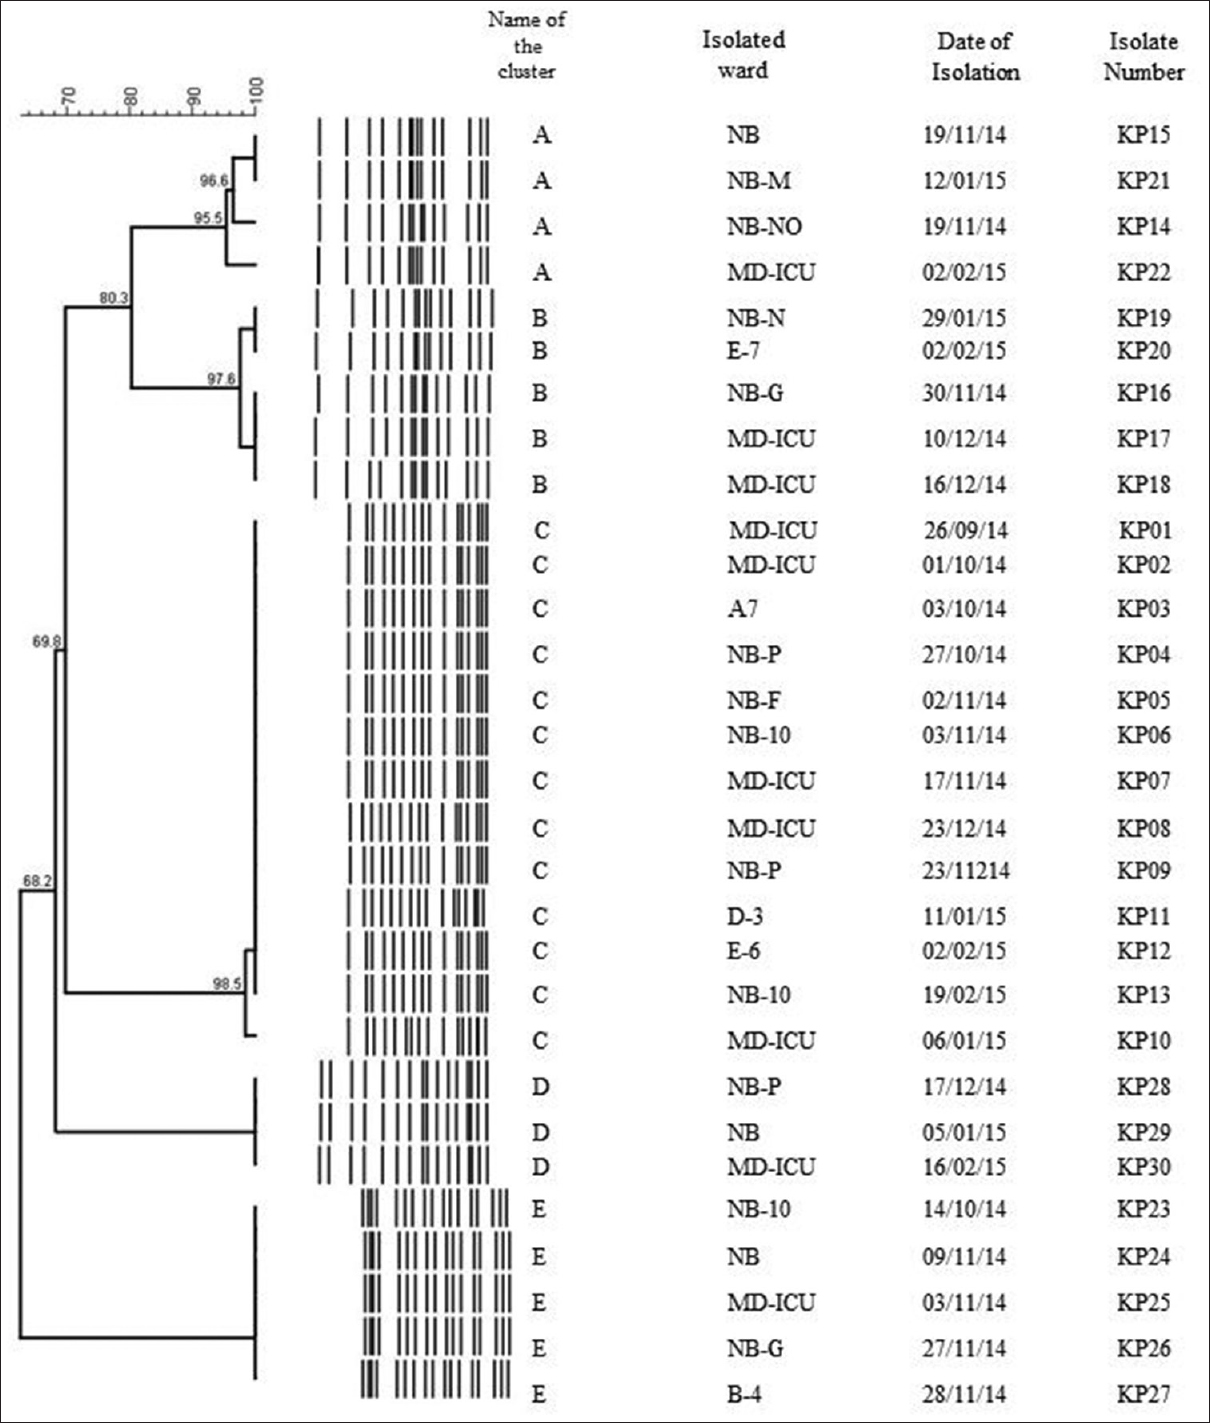 Dendrogram analysis. Dendrogram generated with the BioNumerics software, demonstrating the relatedness of fingerprints of thirty selected strains of Klebsiella pneumoniae. The phylogenetic tree was constructed using the Dice coefficient and unweighted pair group method with arithmetic mean clustering. A genetic similarity index scale is shown in the left of the dendrogram. Pulsed-field gel electrophoresis types, isolated ward, date of isolation, and strain numbers are included along each pulsed-field gel electrophoresis lane